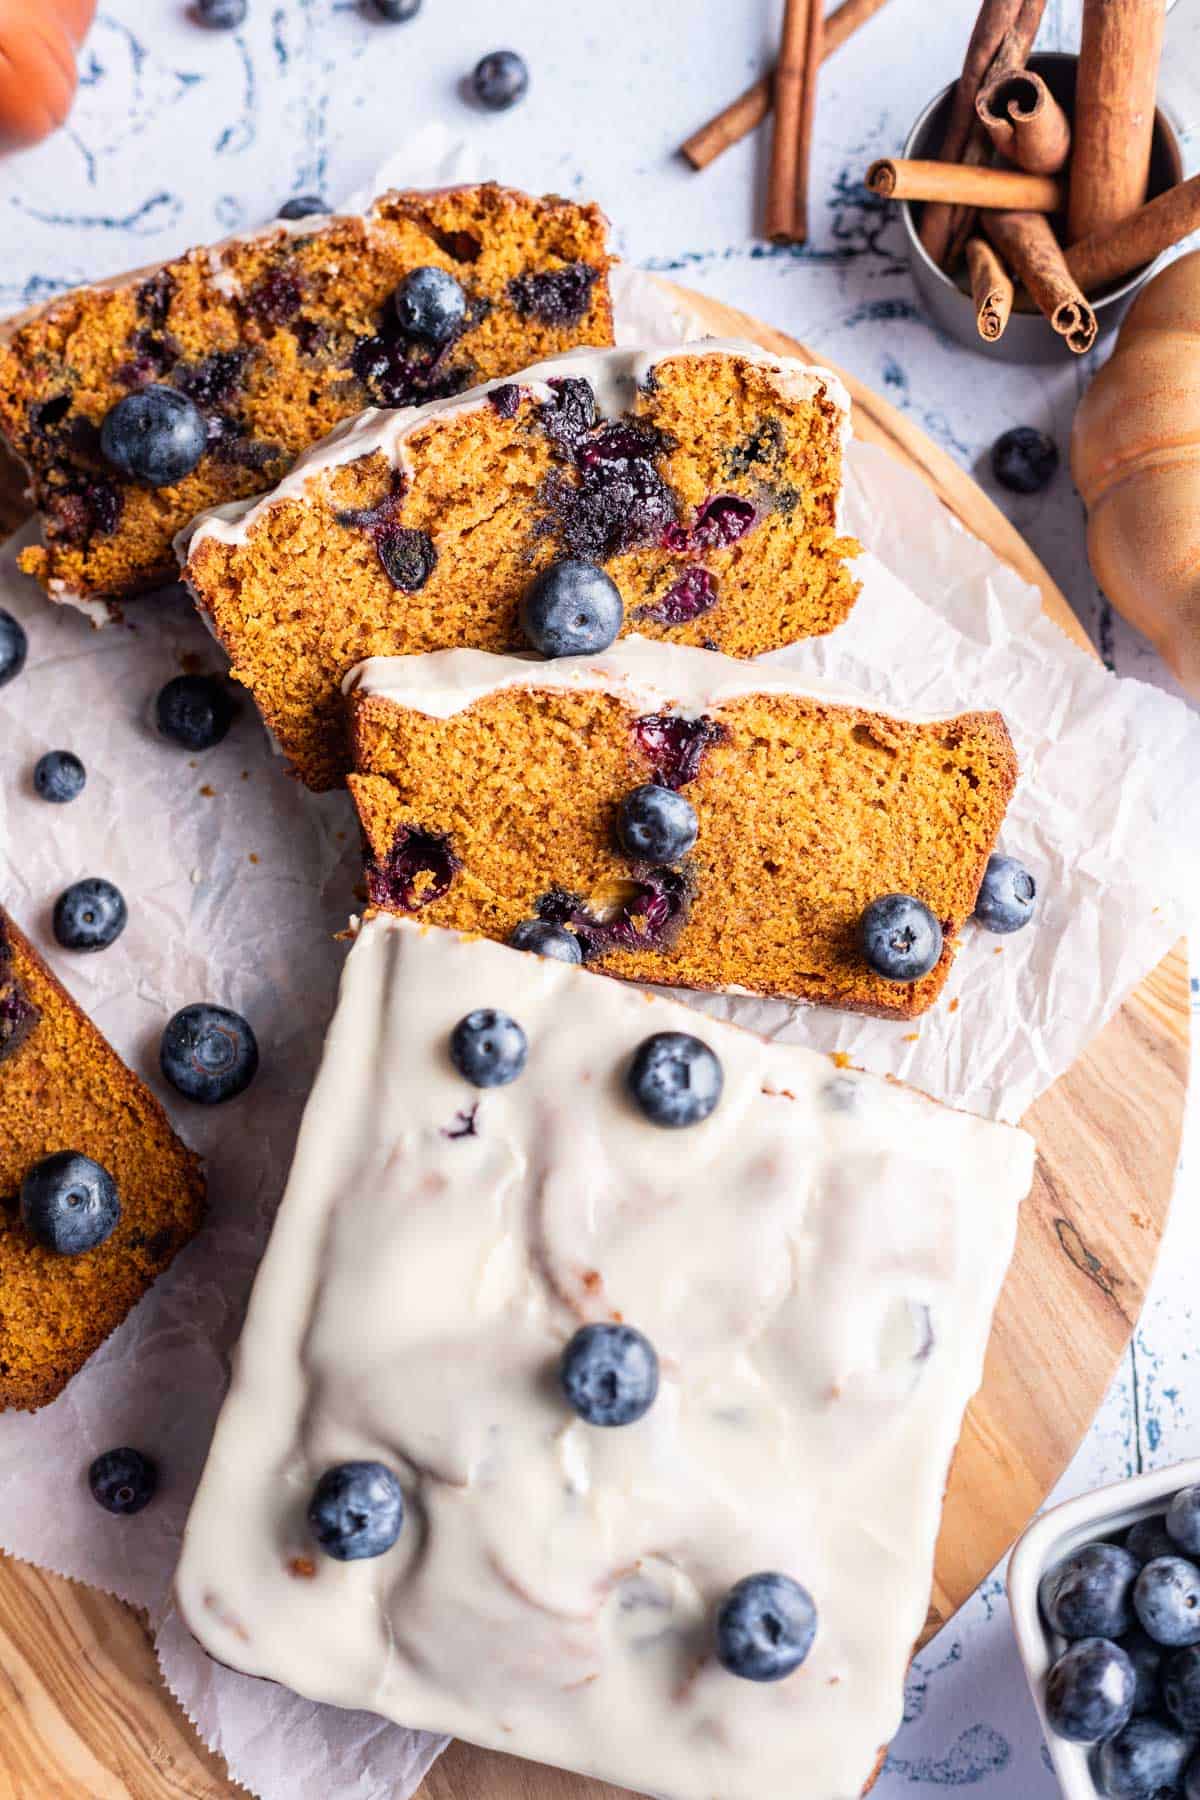 Pumpkin blueberry bread glazed and sliced into serving pieces.